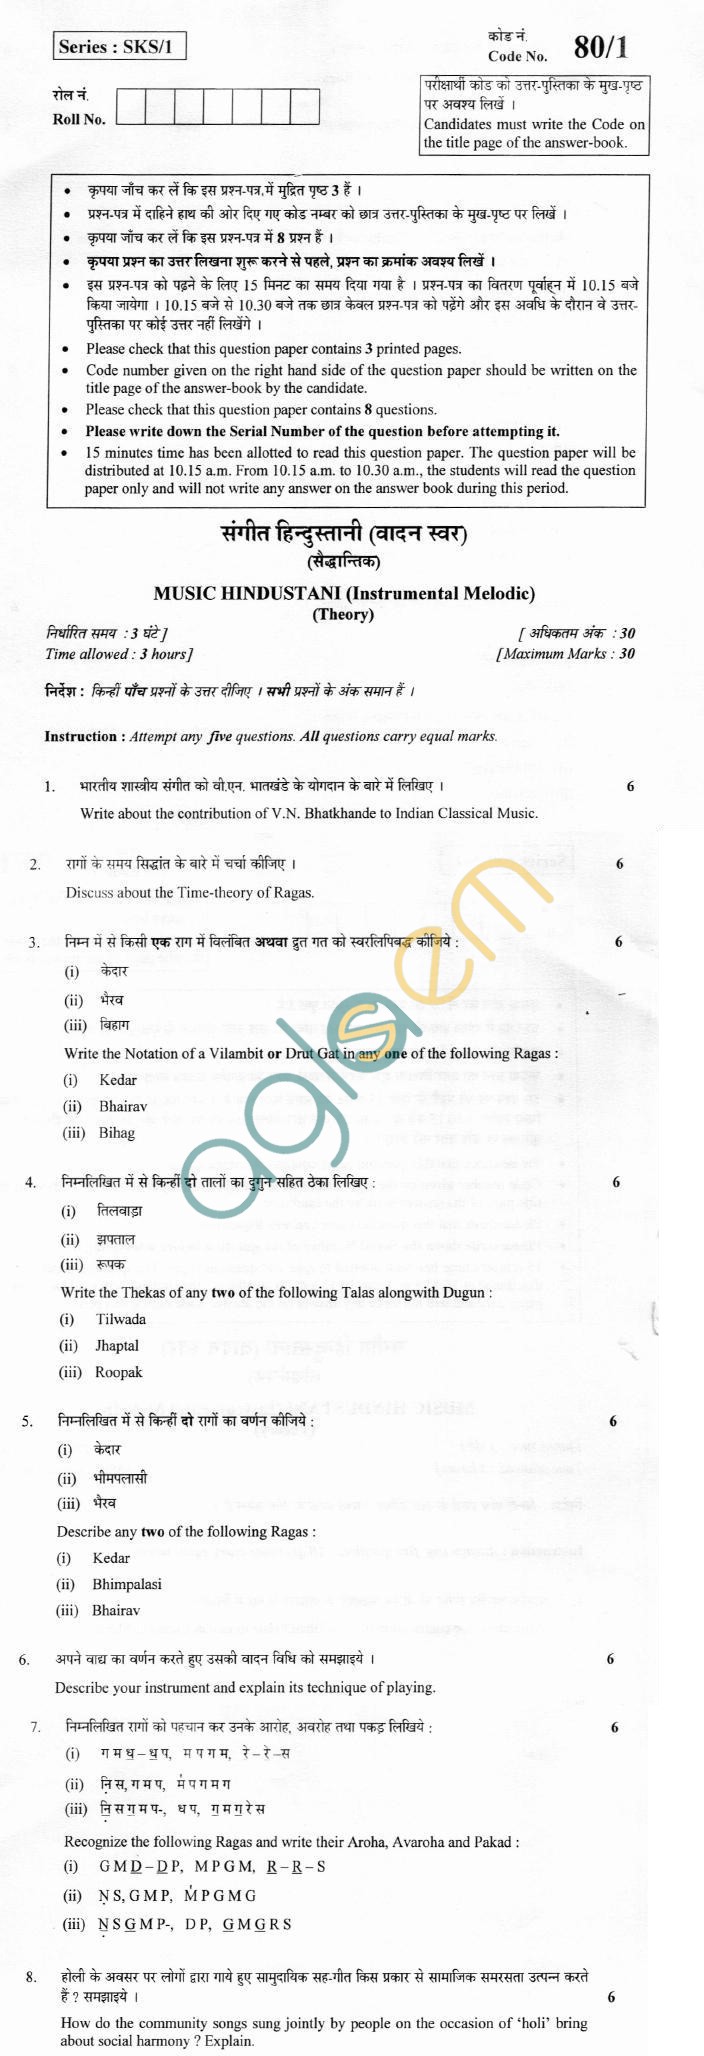 CBSE Board Exam 2013 Class XII Question Paper - Music Hindustani (Instrumental Melodic)